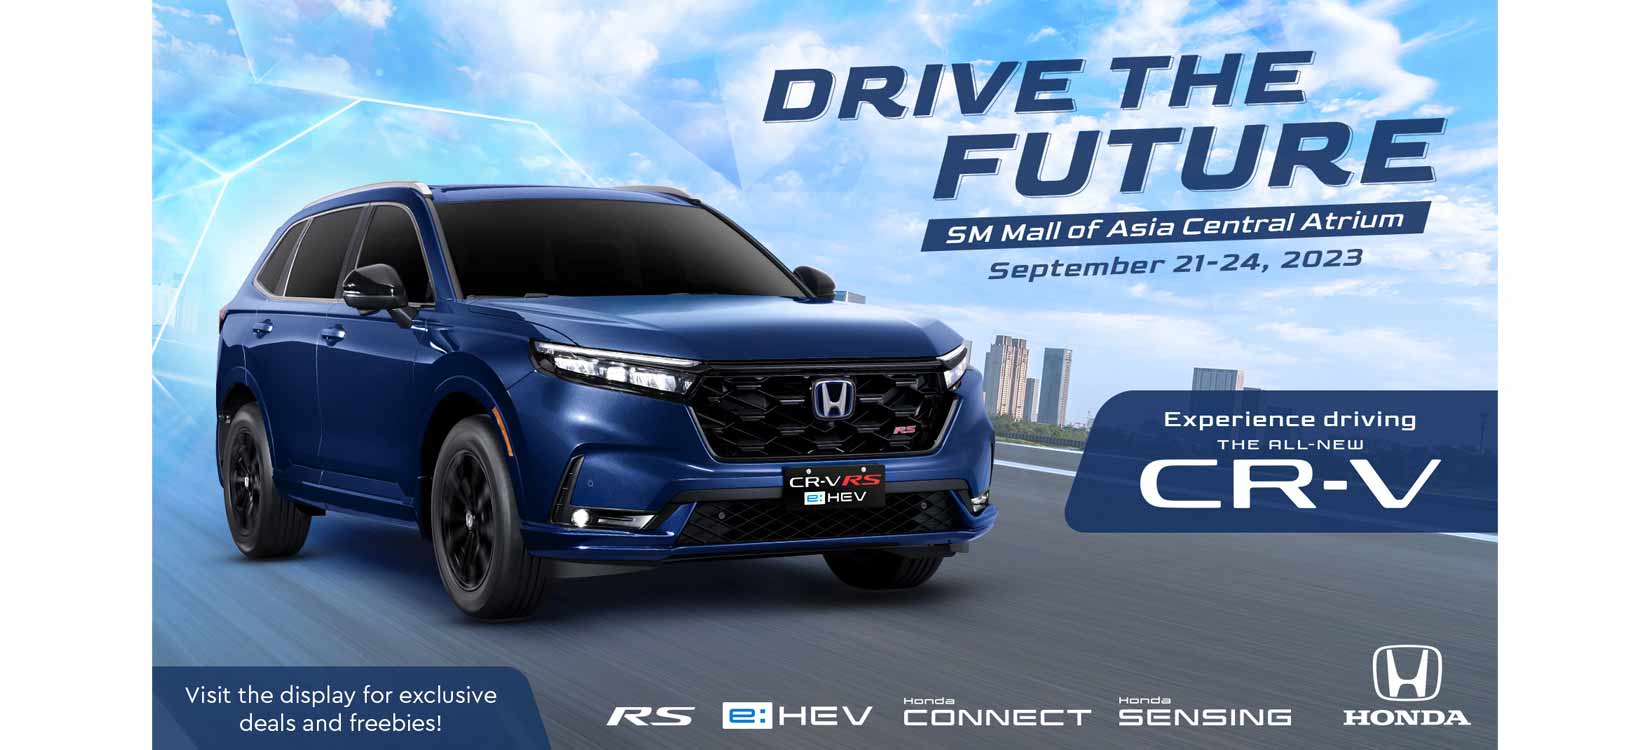 Drive the Future: Experience the All-New Honda CR-V  at SM Mall of Asia on September 21-24, 2023